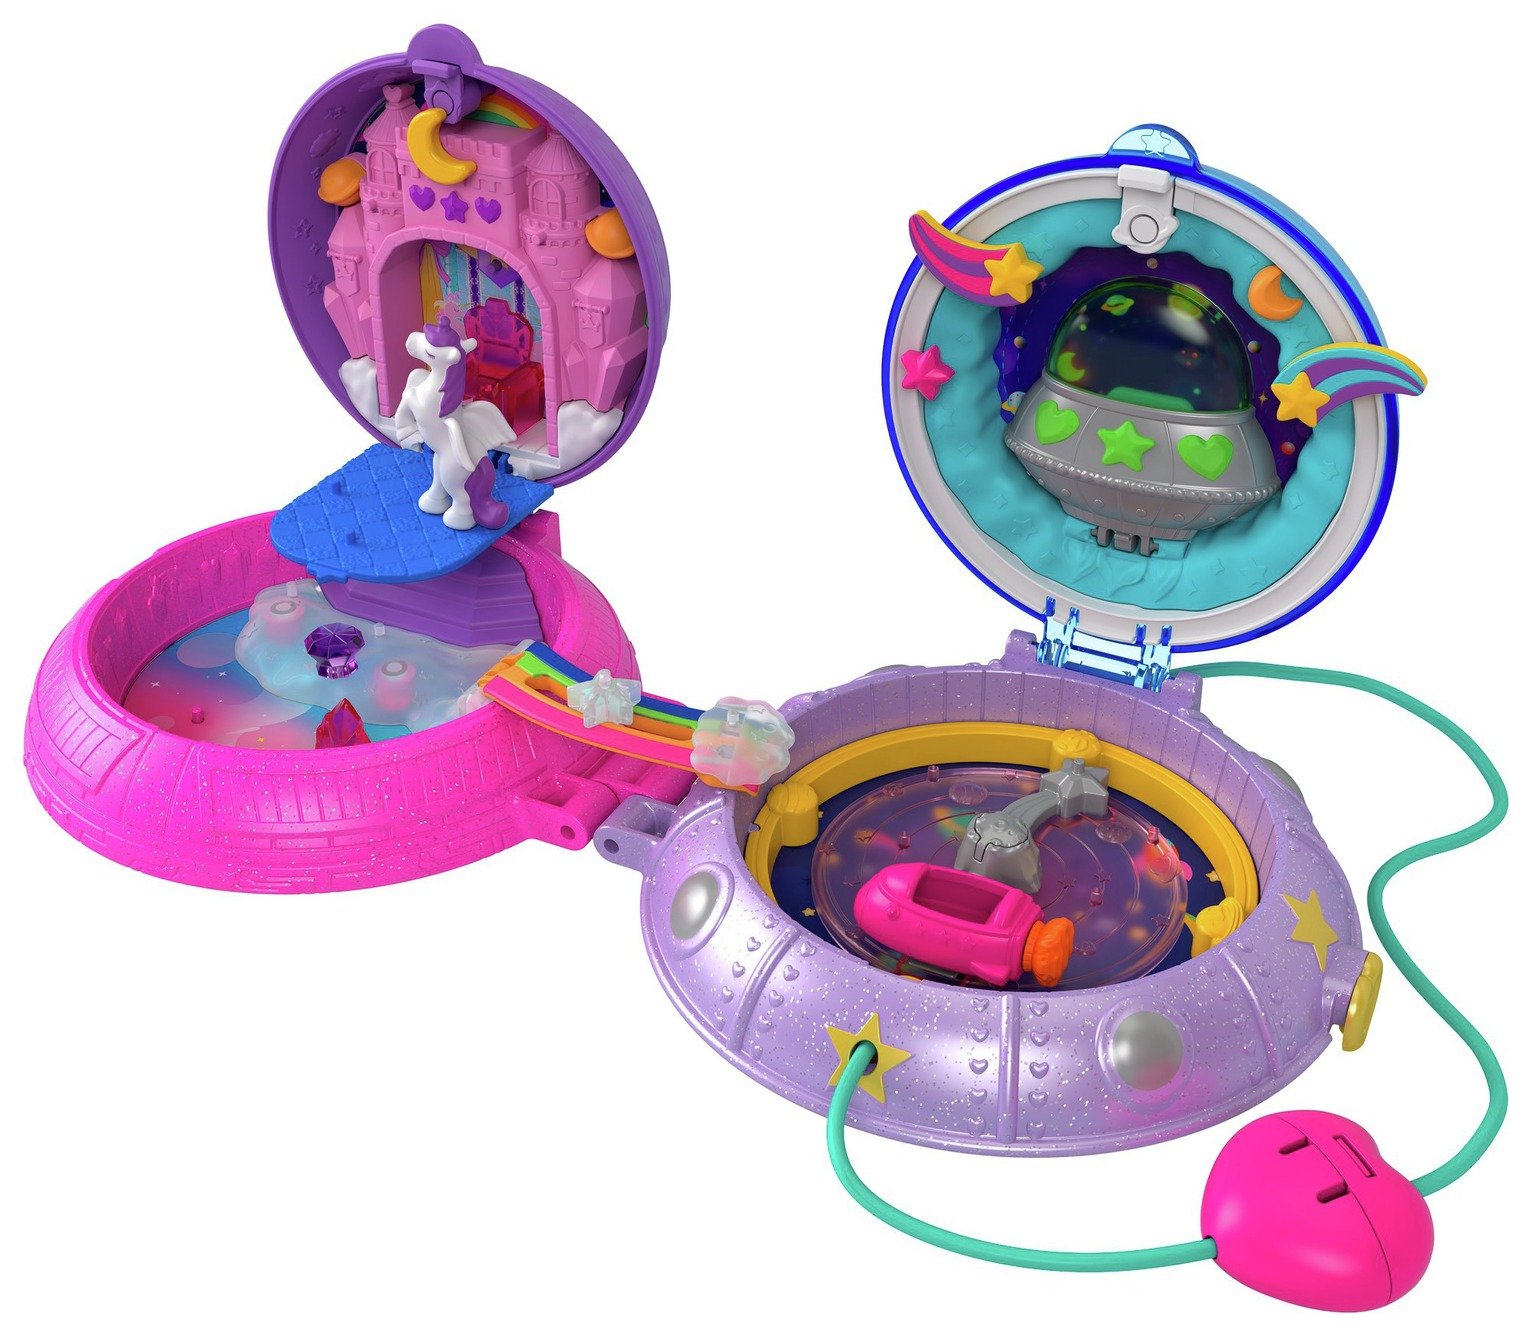 Polly Pocket Double Play Space Micro Compact Playset review